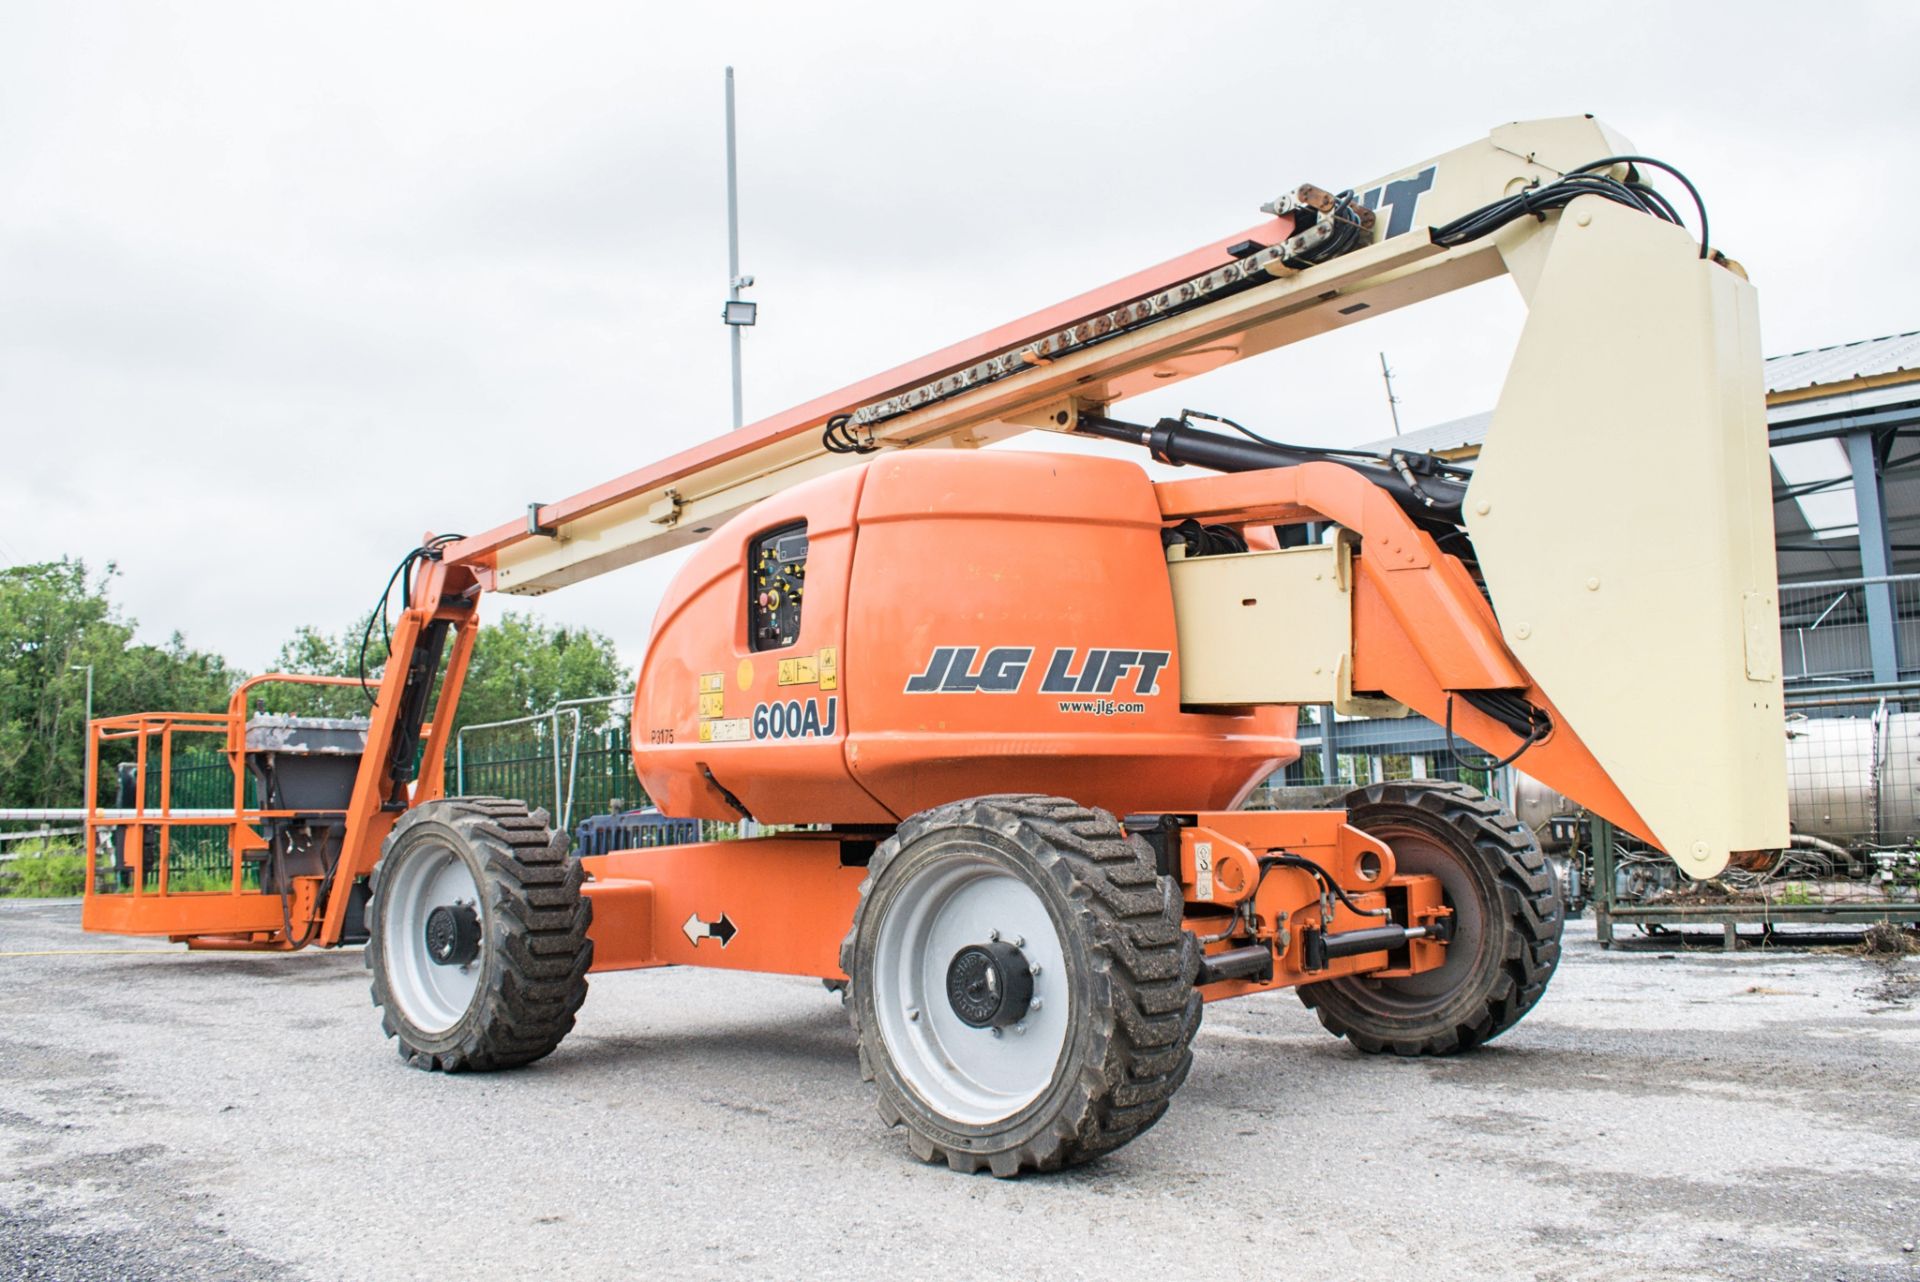 JLG 600AJ 60 ft diesel driven 4WD articulated boom lift Year: 2008 S/N: 123422 Recorded Hours: - Image 4 of 19